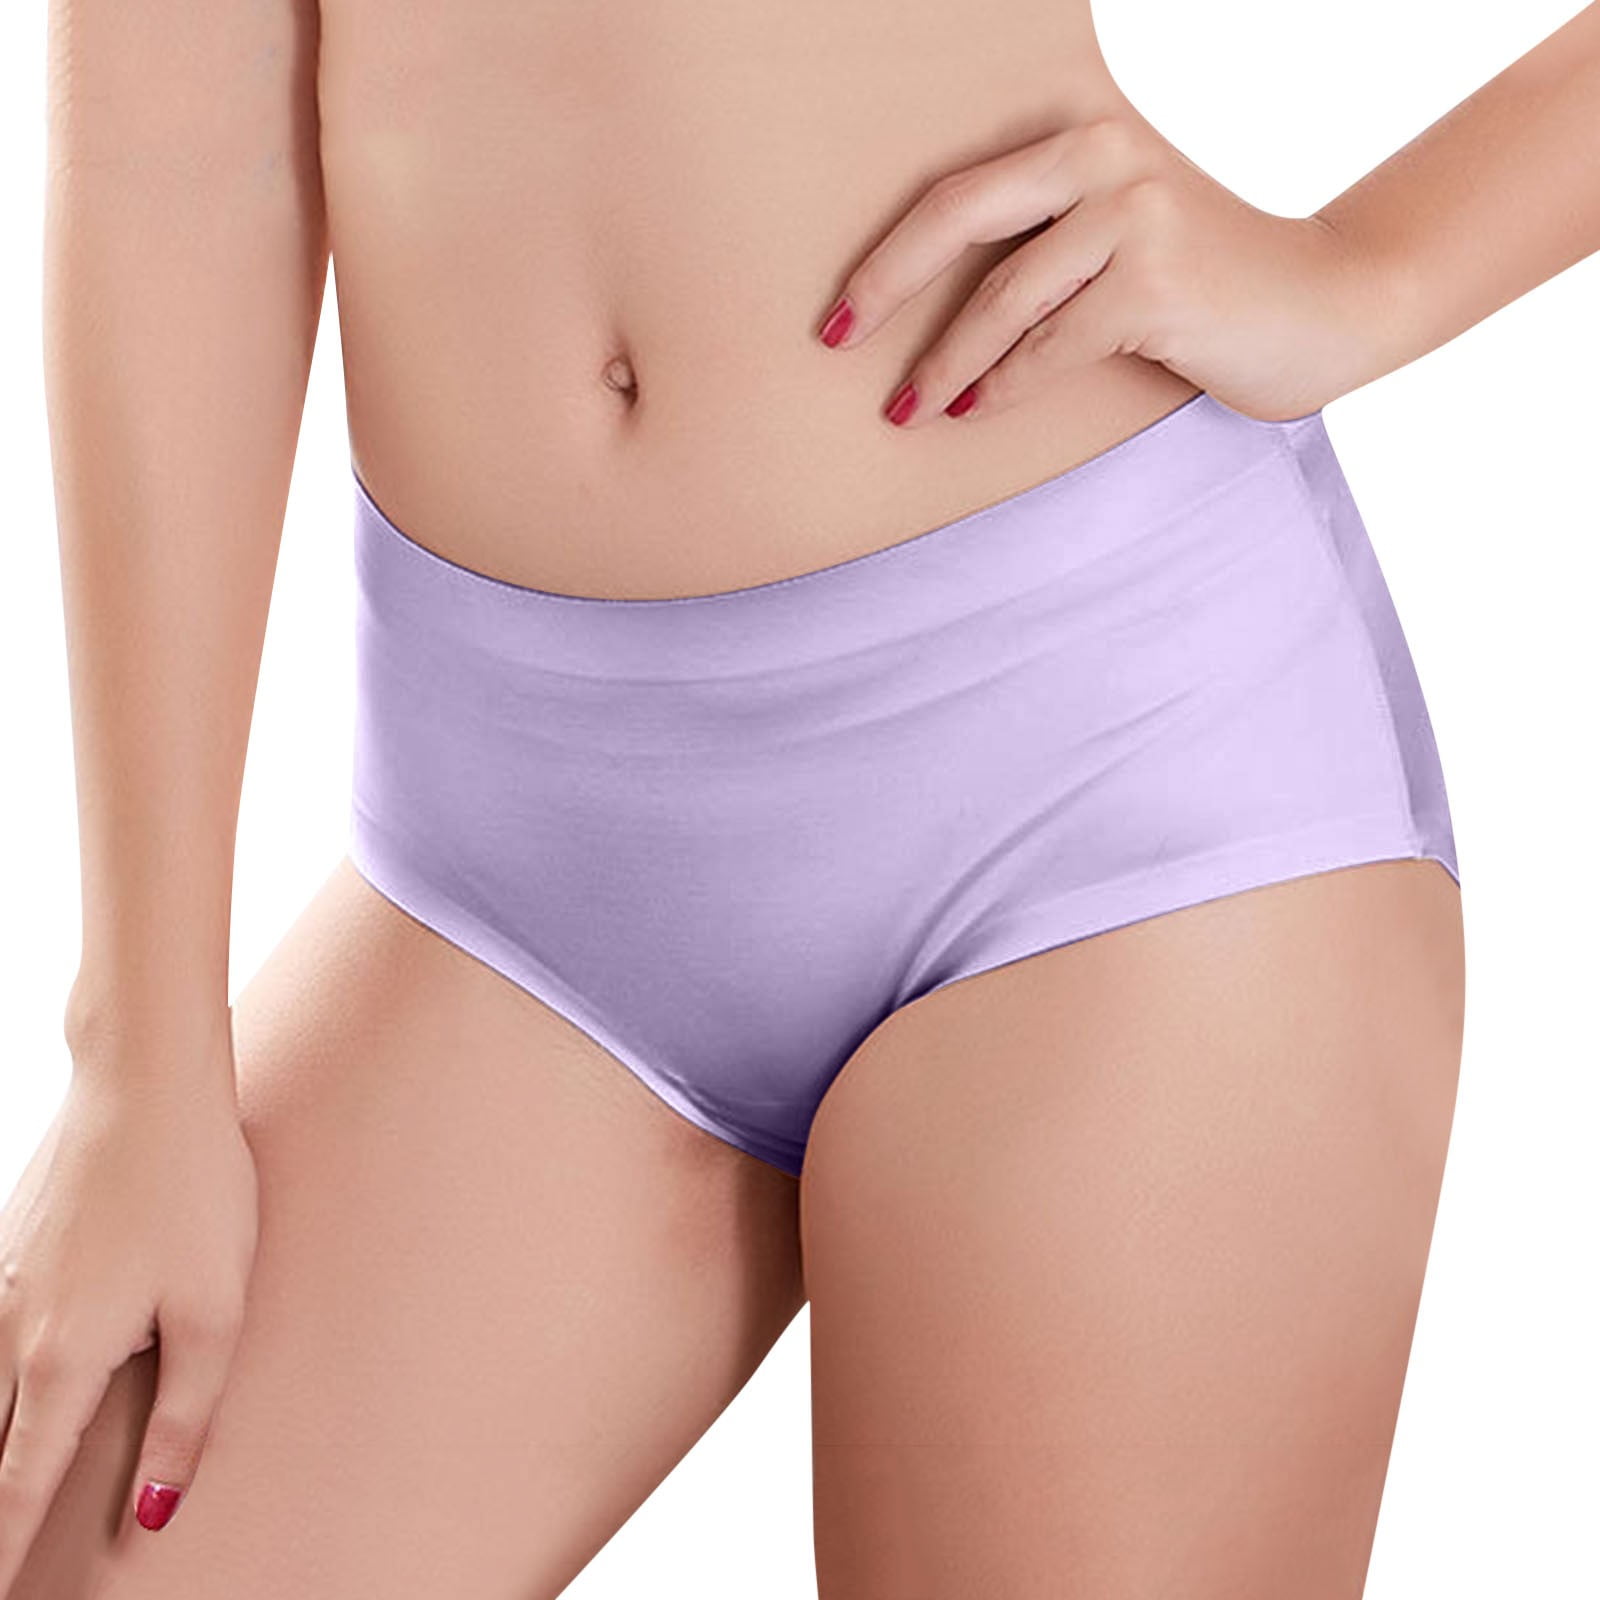 Size M-4XL 5-Pack Womens Cotton Panties Full Coverage Panty,Comfy Cotton  Granny Panties Full Cut